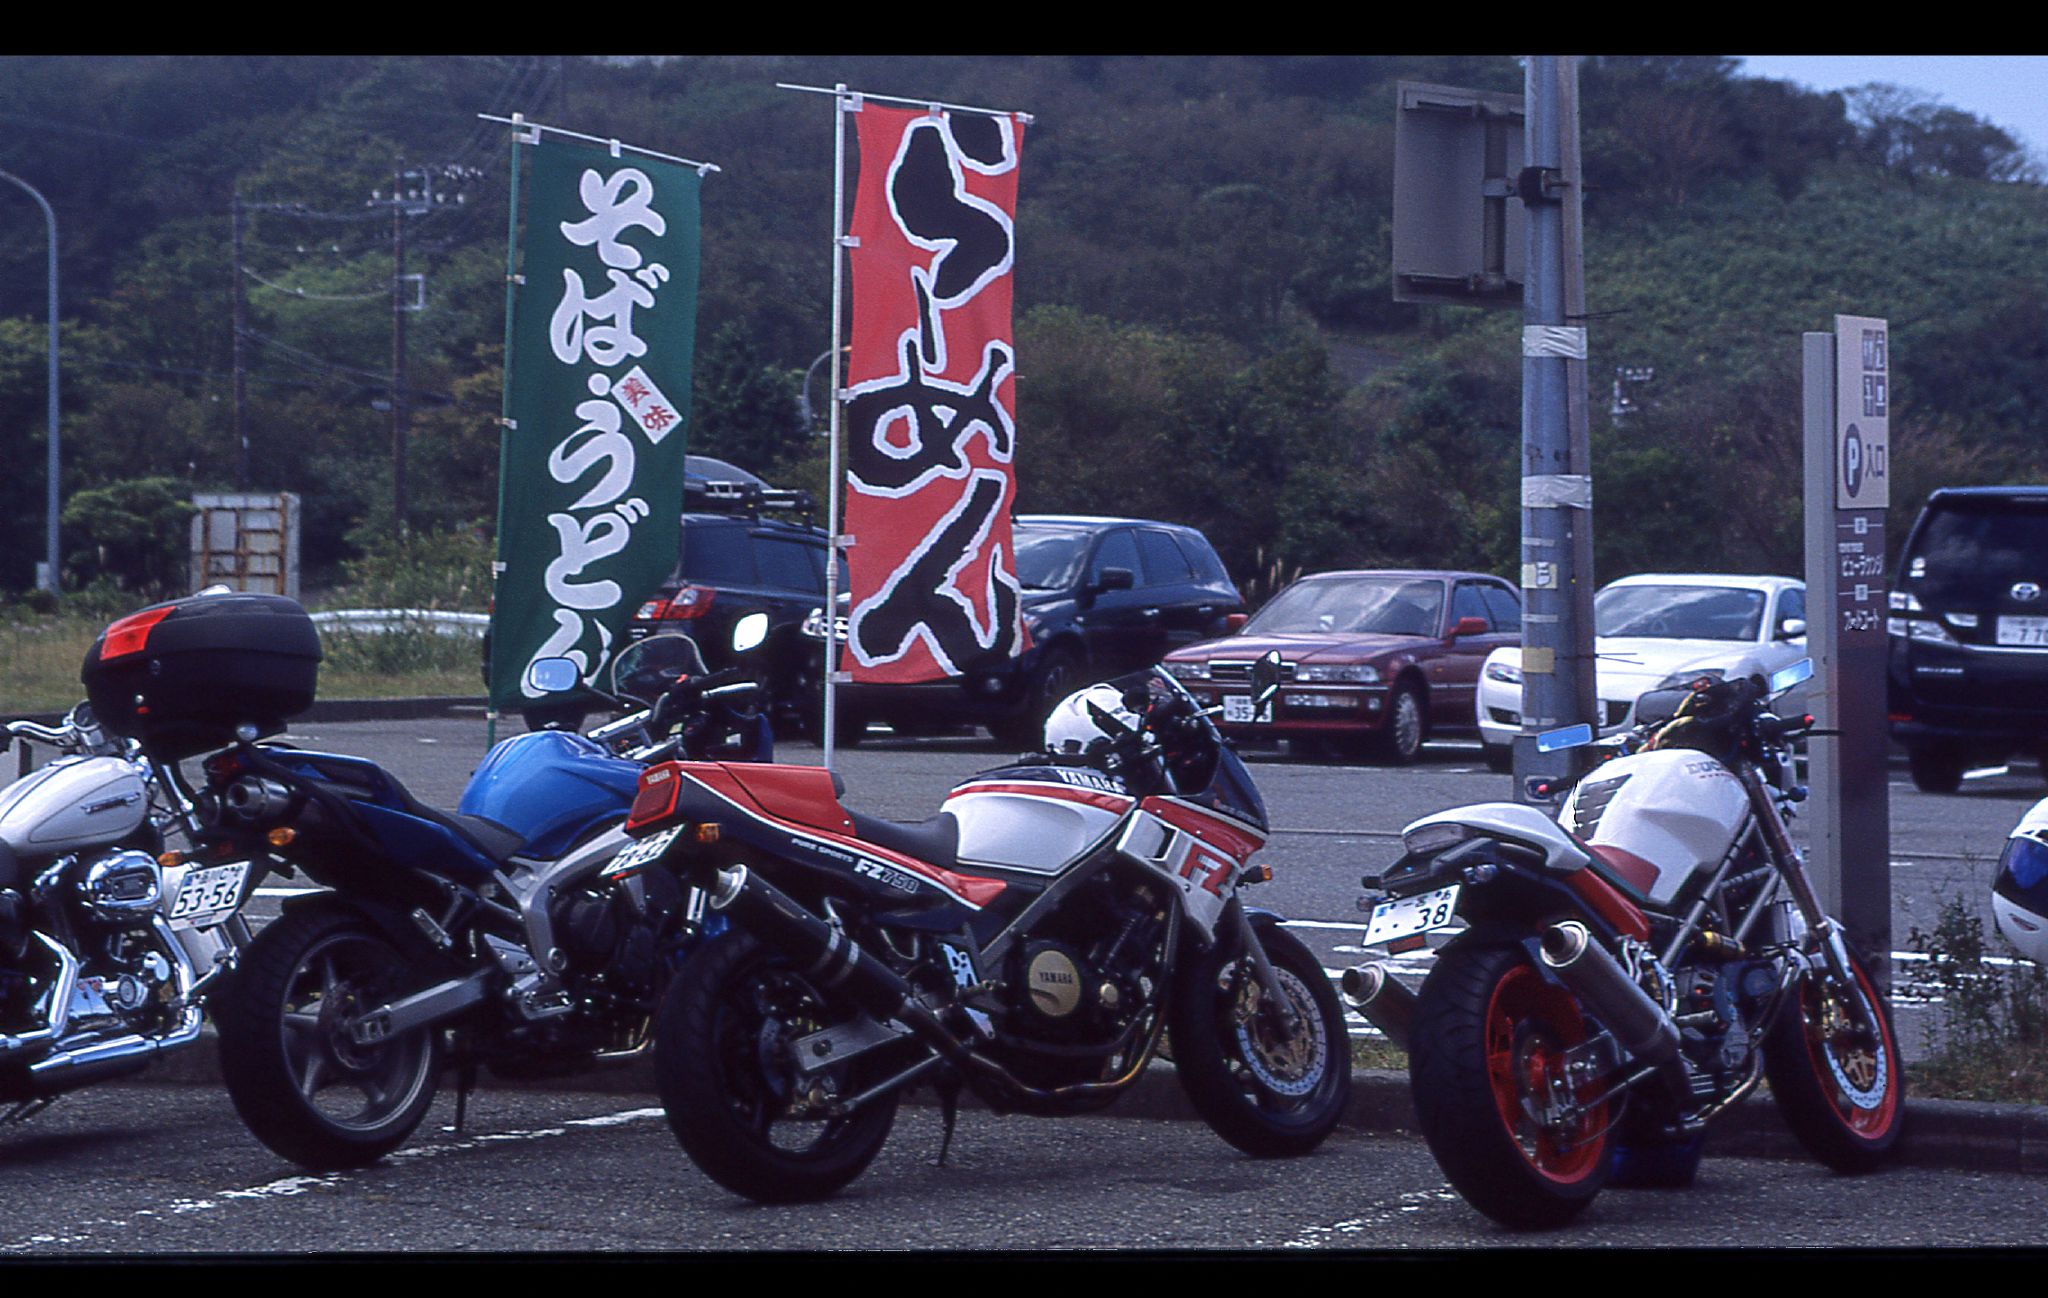 three motorbikes in an asian language are parked on the side of a road